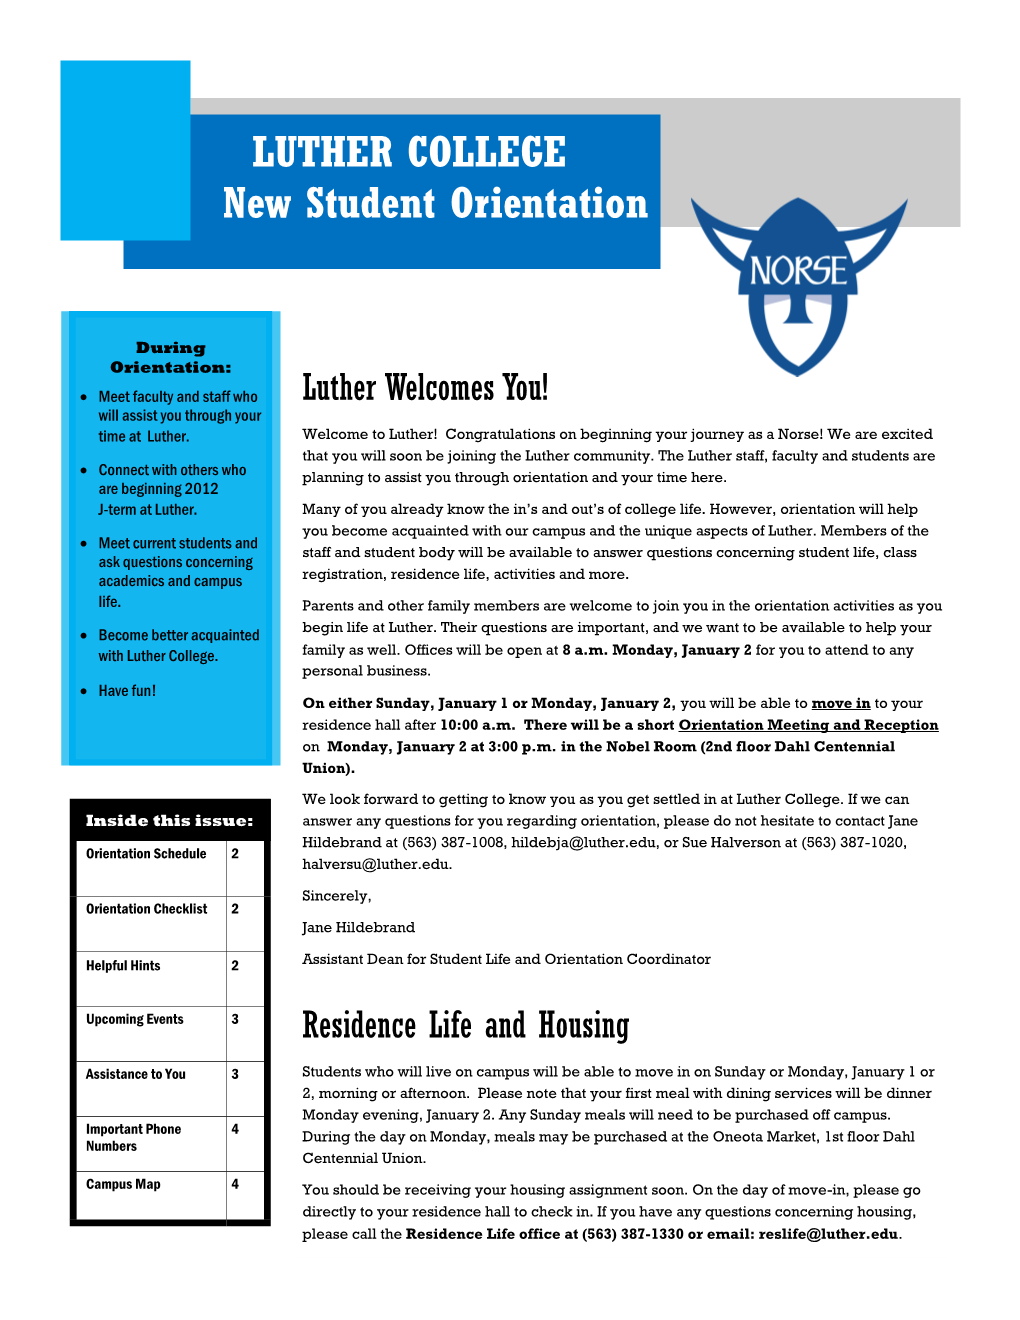 LUTHER COLLEGE New Student Orientation